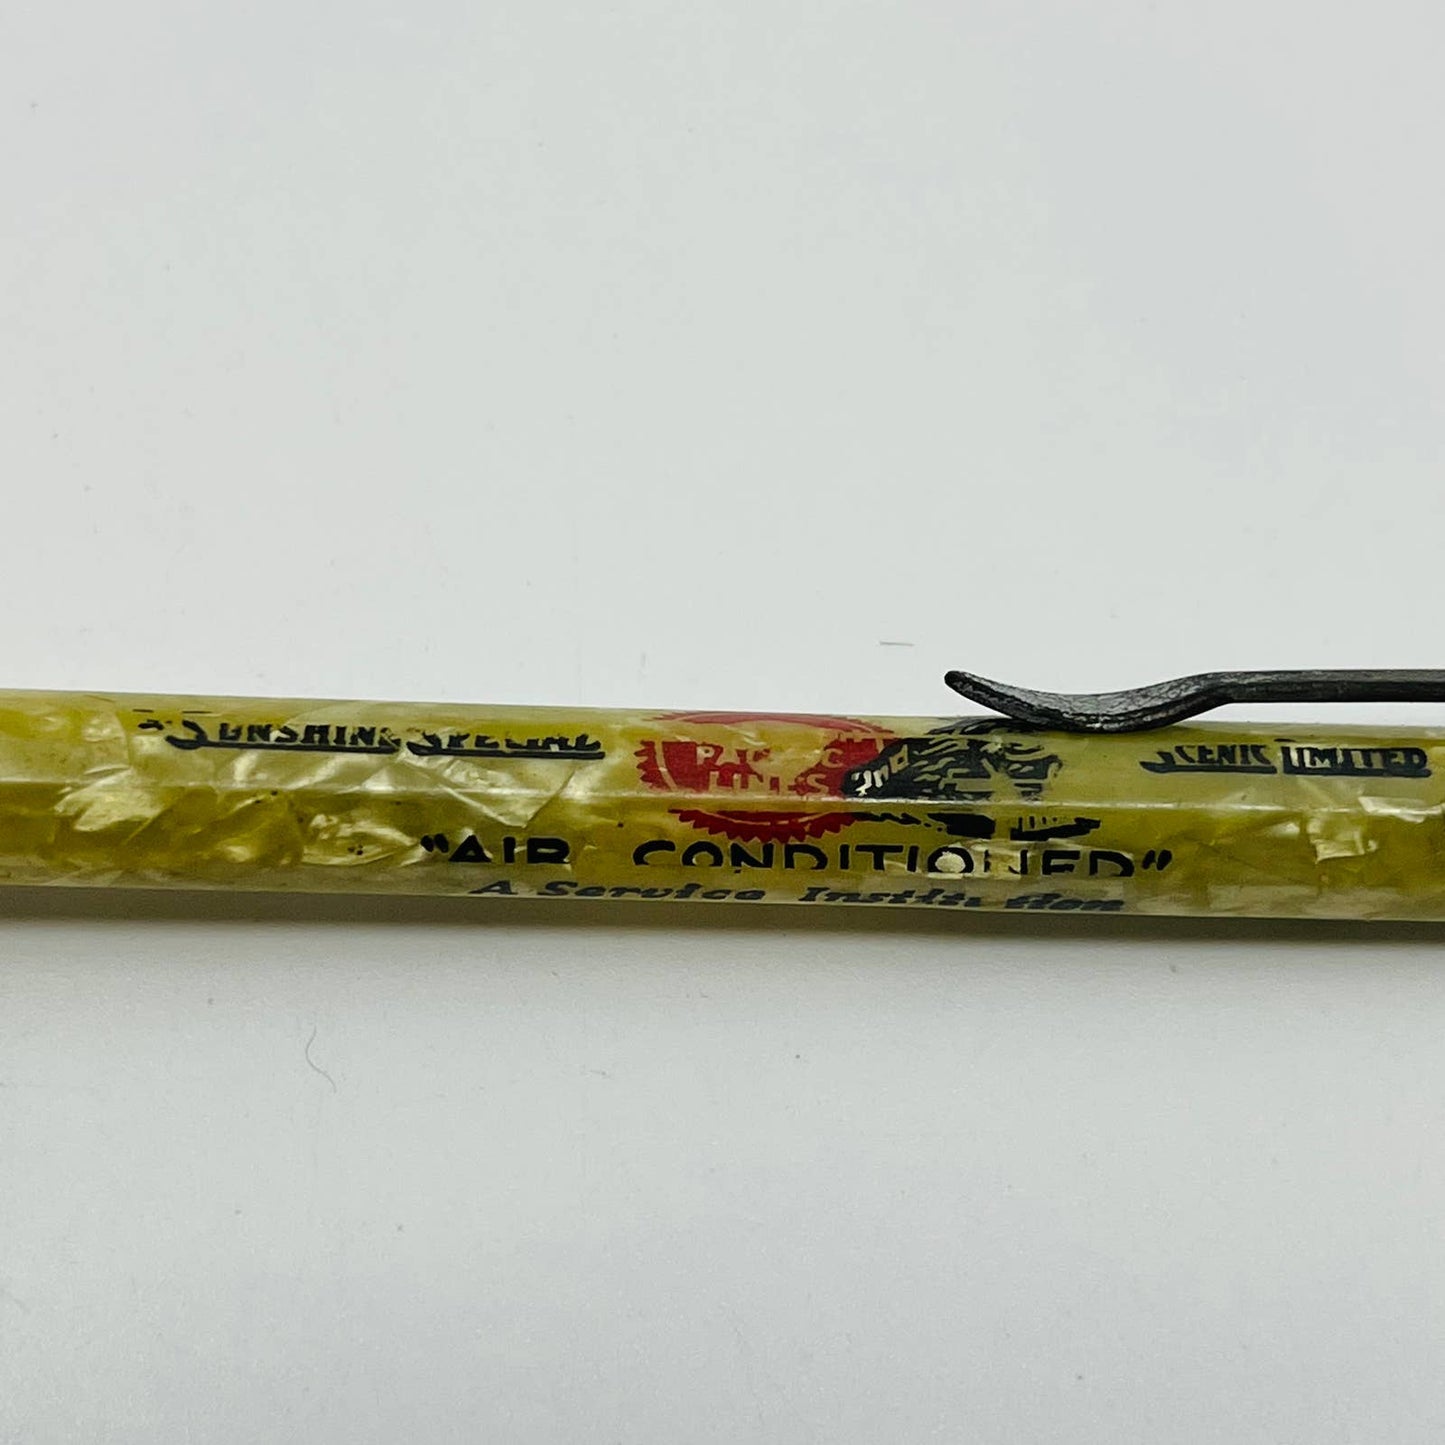 Celluloid Mother of Pearl Mechanical Pencil Missouri Pacific Lines Railroad SB3